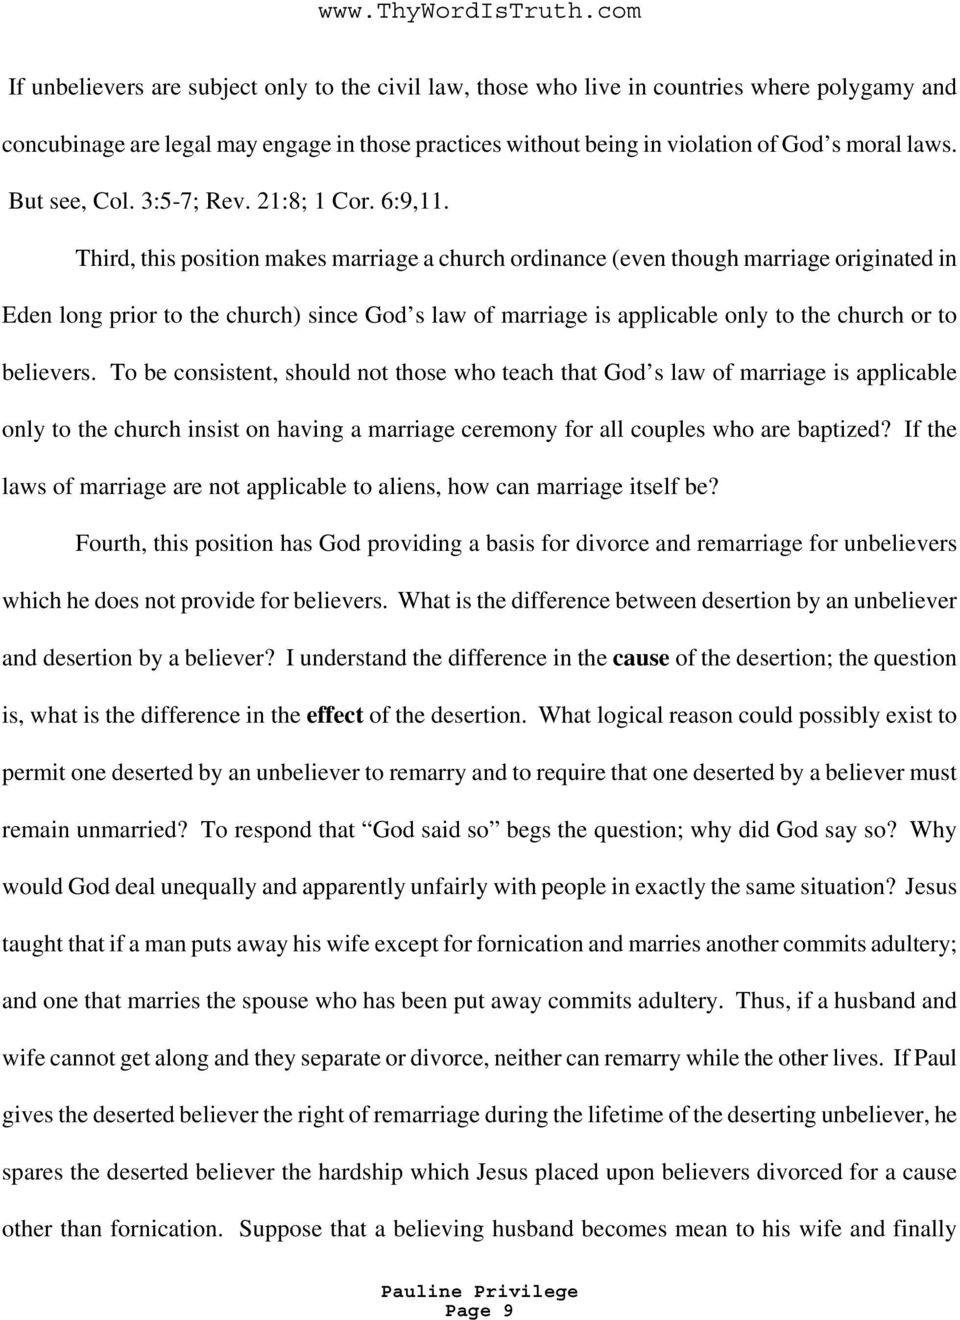 Third, this position makes marriage a church ordinance (even though marriage originated in Eden long prior to the church) since God s law of marriage is applicable only to the church or to believers.